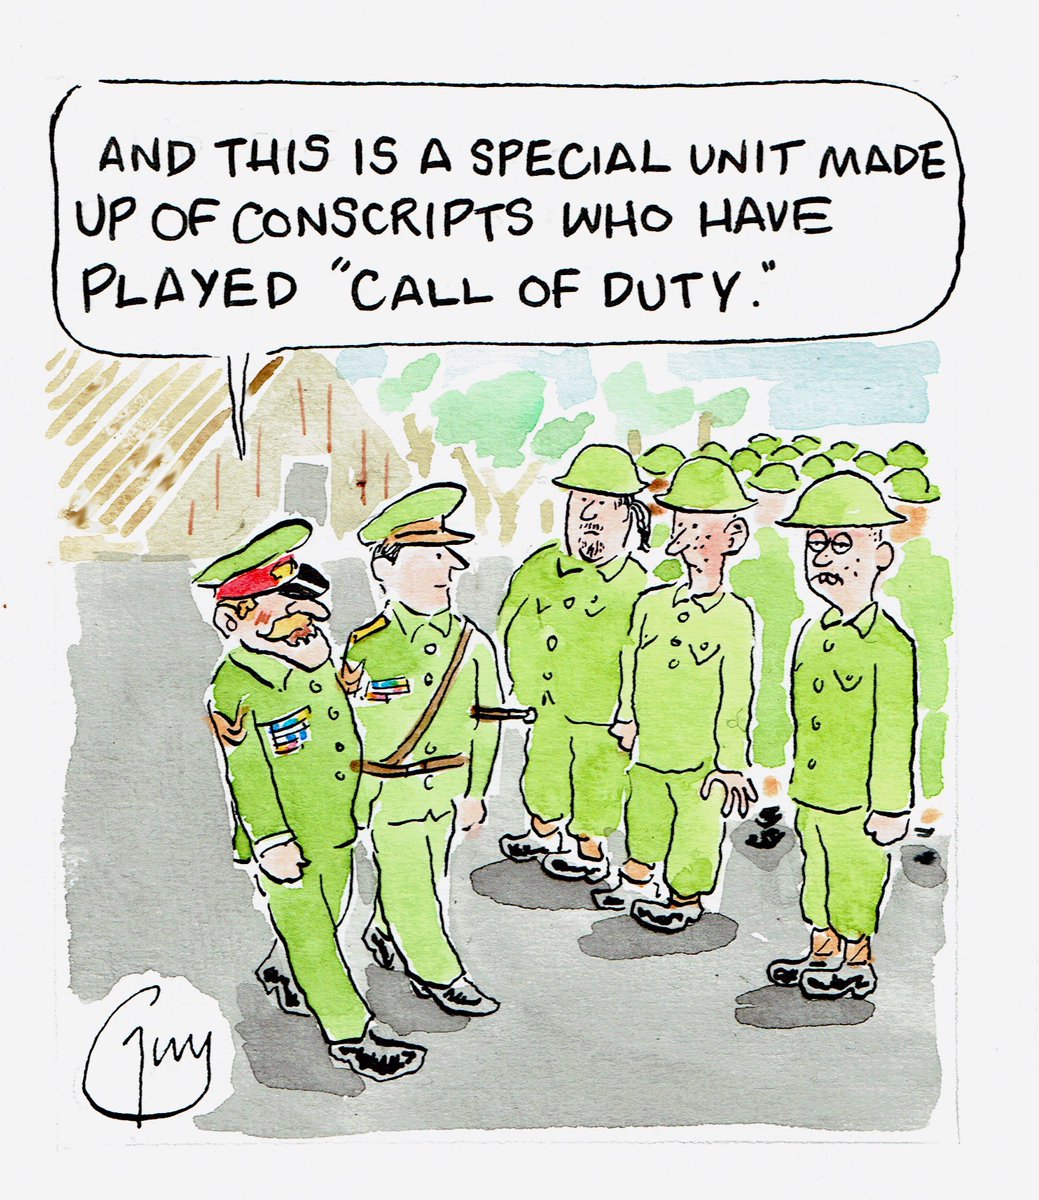 My cartoon for Monday's @MetroUK @MetroPicDesk #conscription #armyofficers #Nationalsevice #armedforces